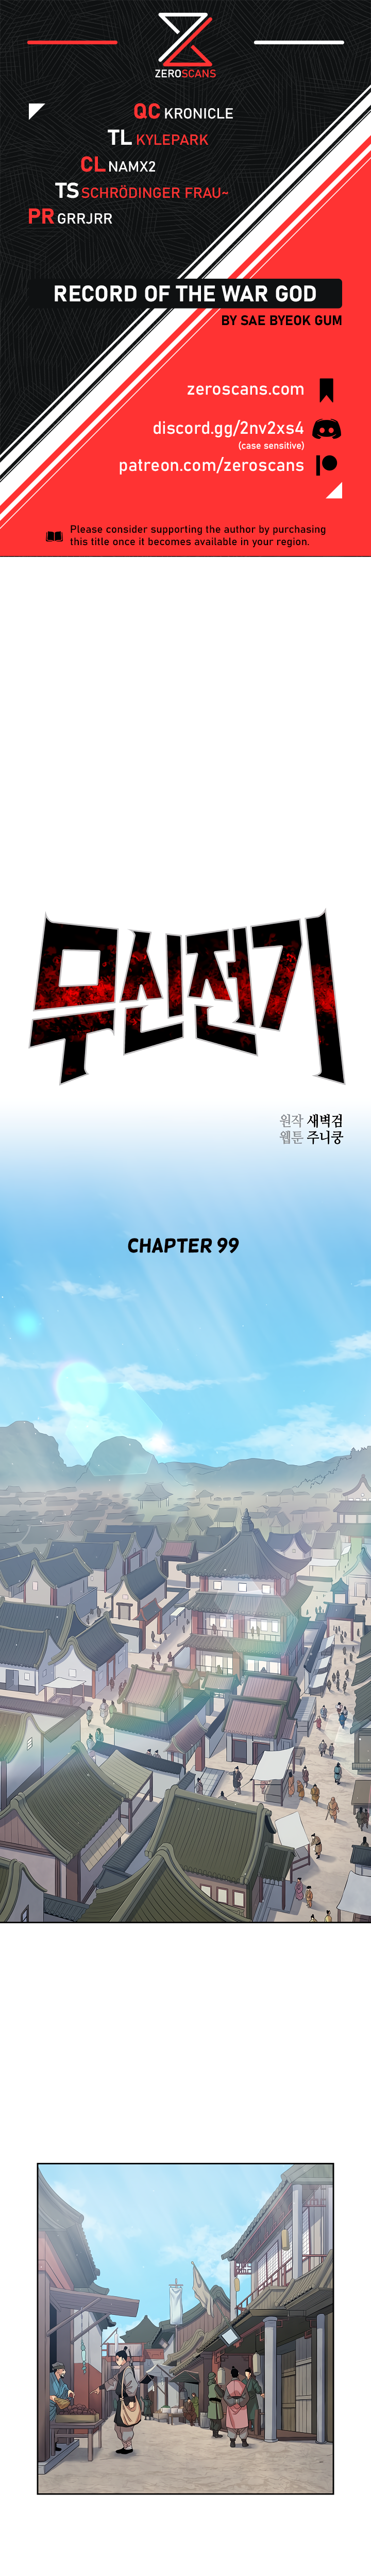 Record of the War God - Chapter 7114 - Image 1